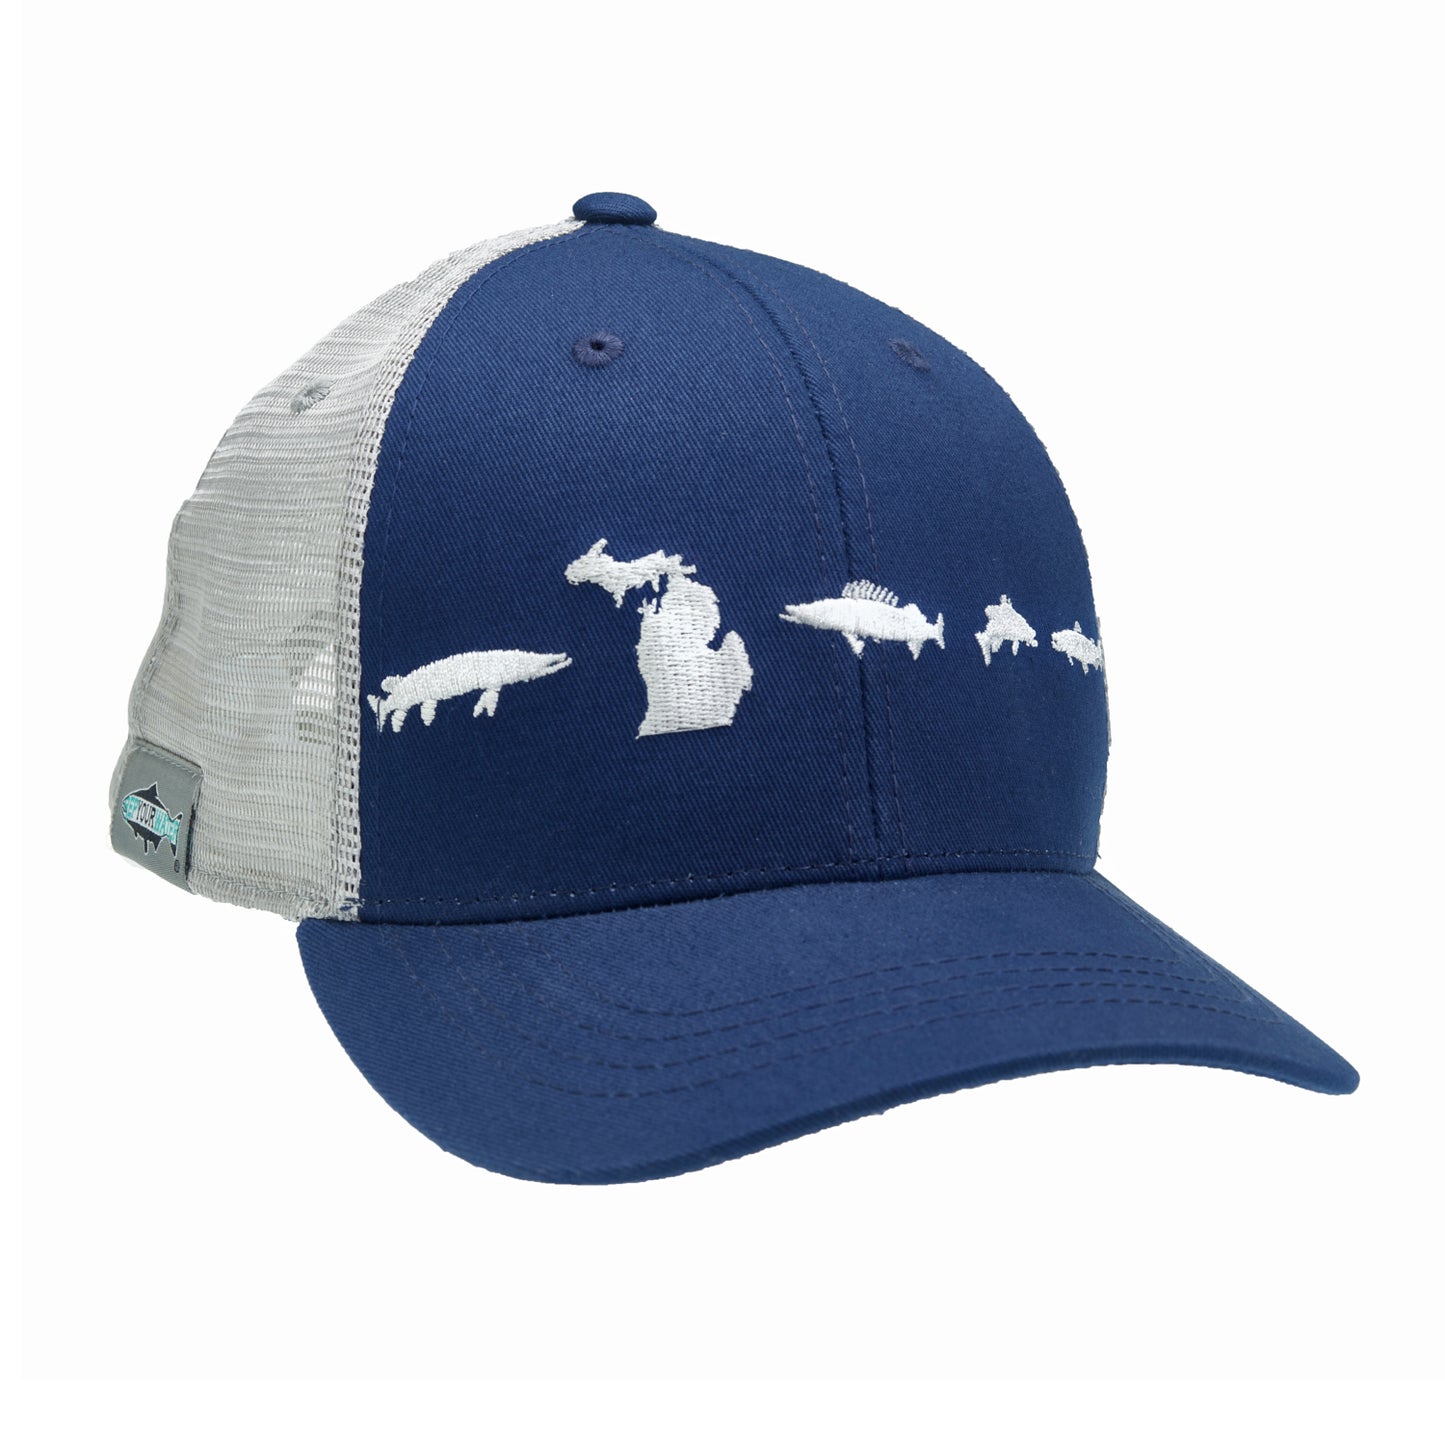 A hat with light gray mesh in the back, navy cloth in the front and fish embroidered across the front of the hat with the state shape of Michigan.